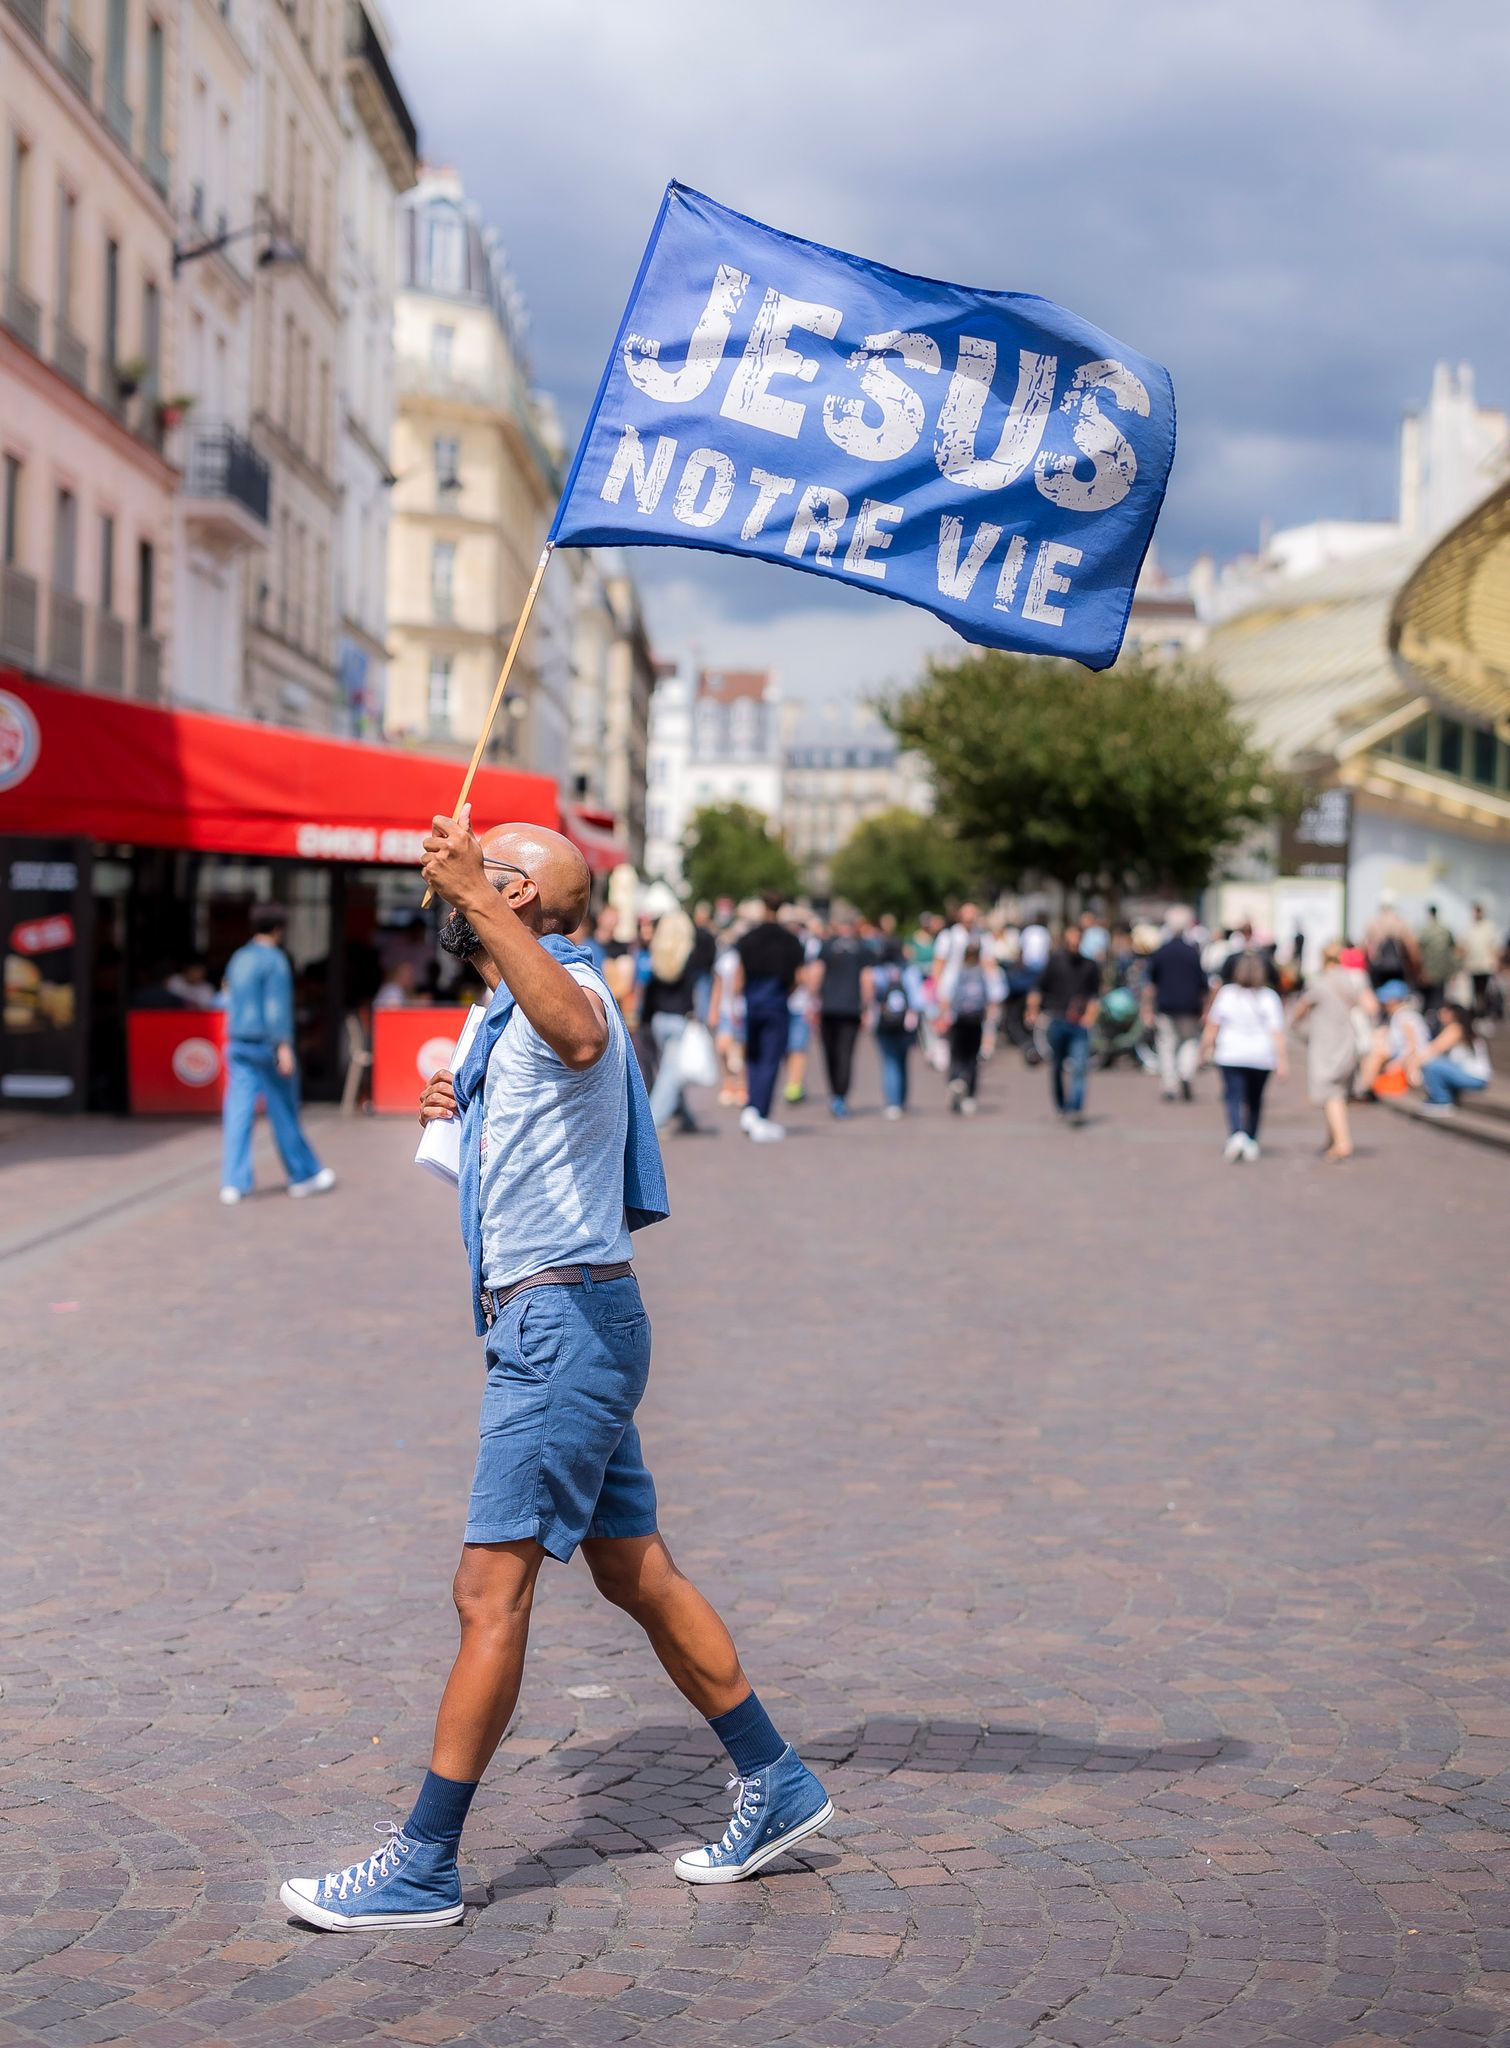 A French Christian missionary waves the flag "Jesus is our Life" in the center of a bustling intersection